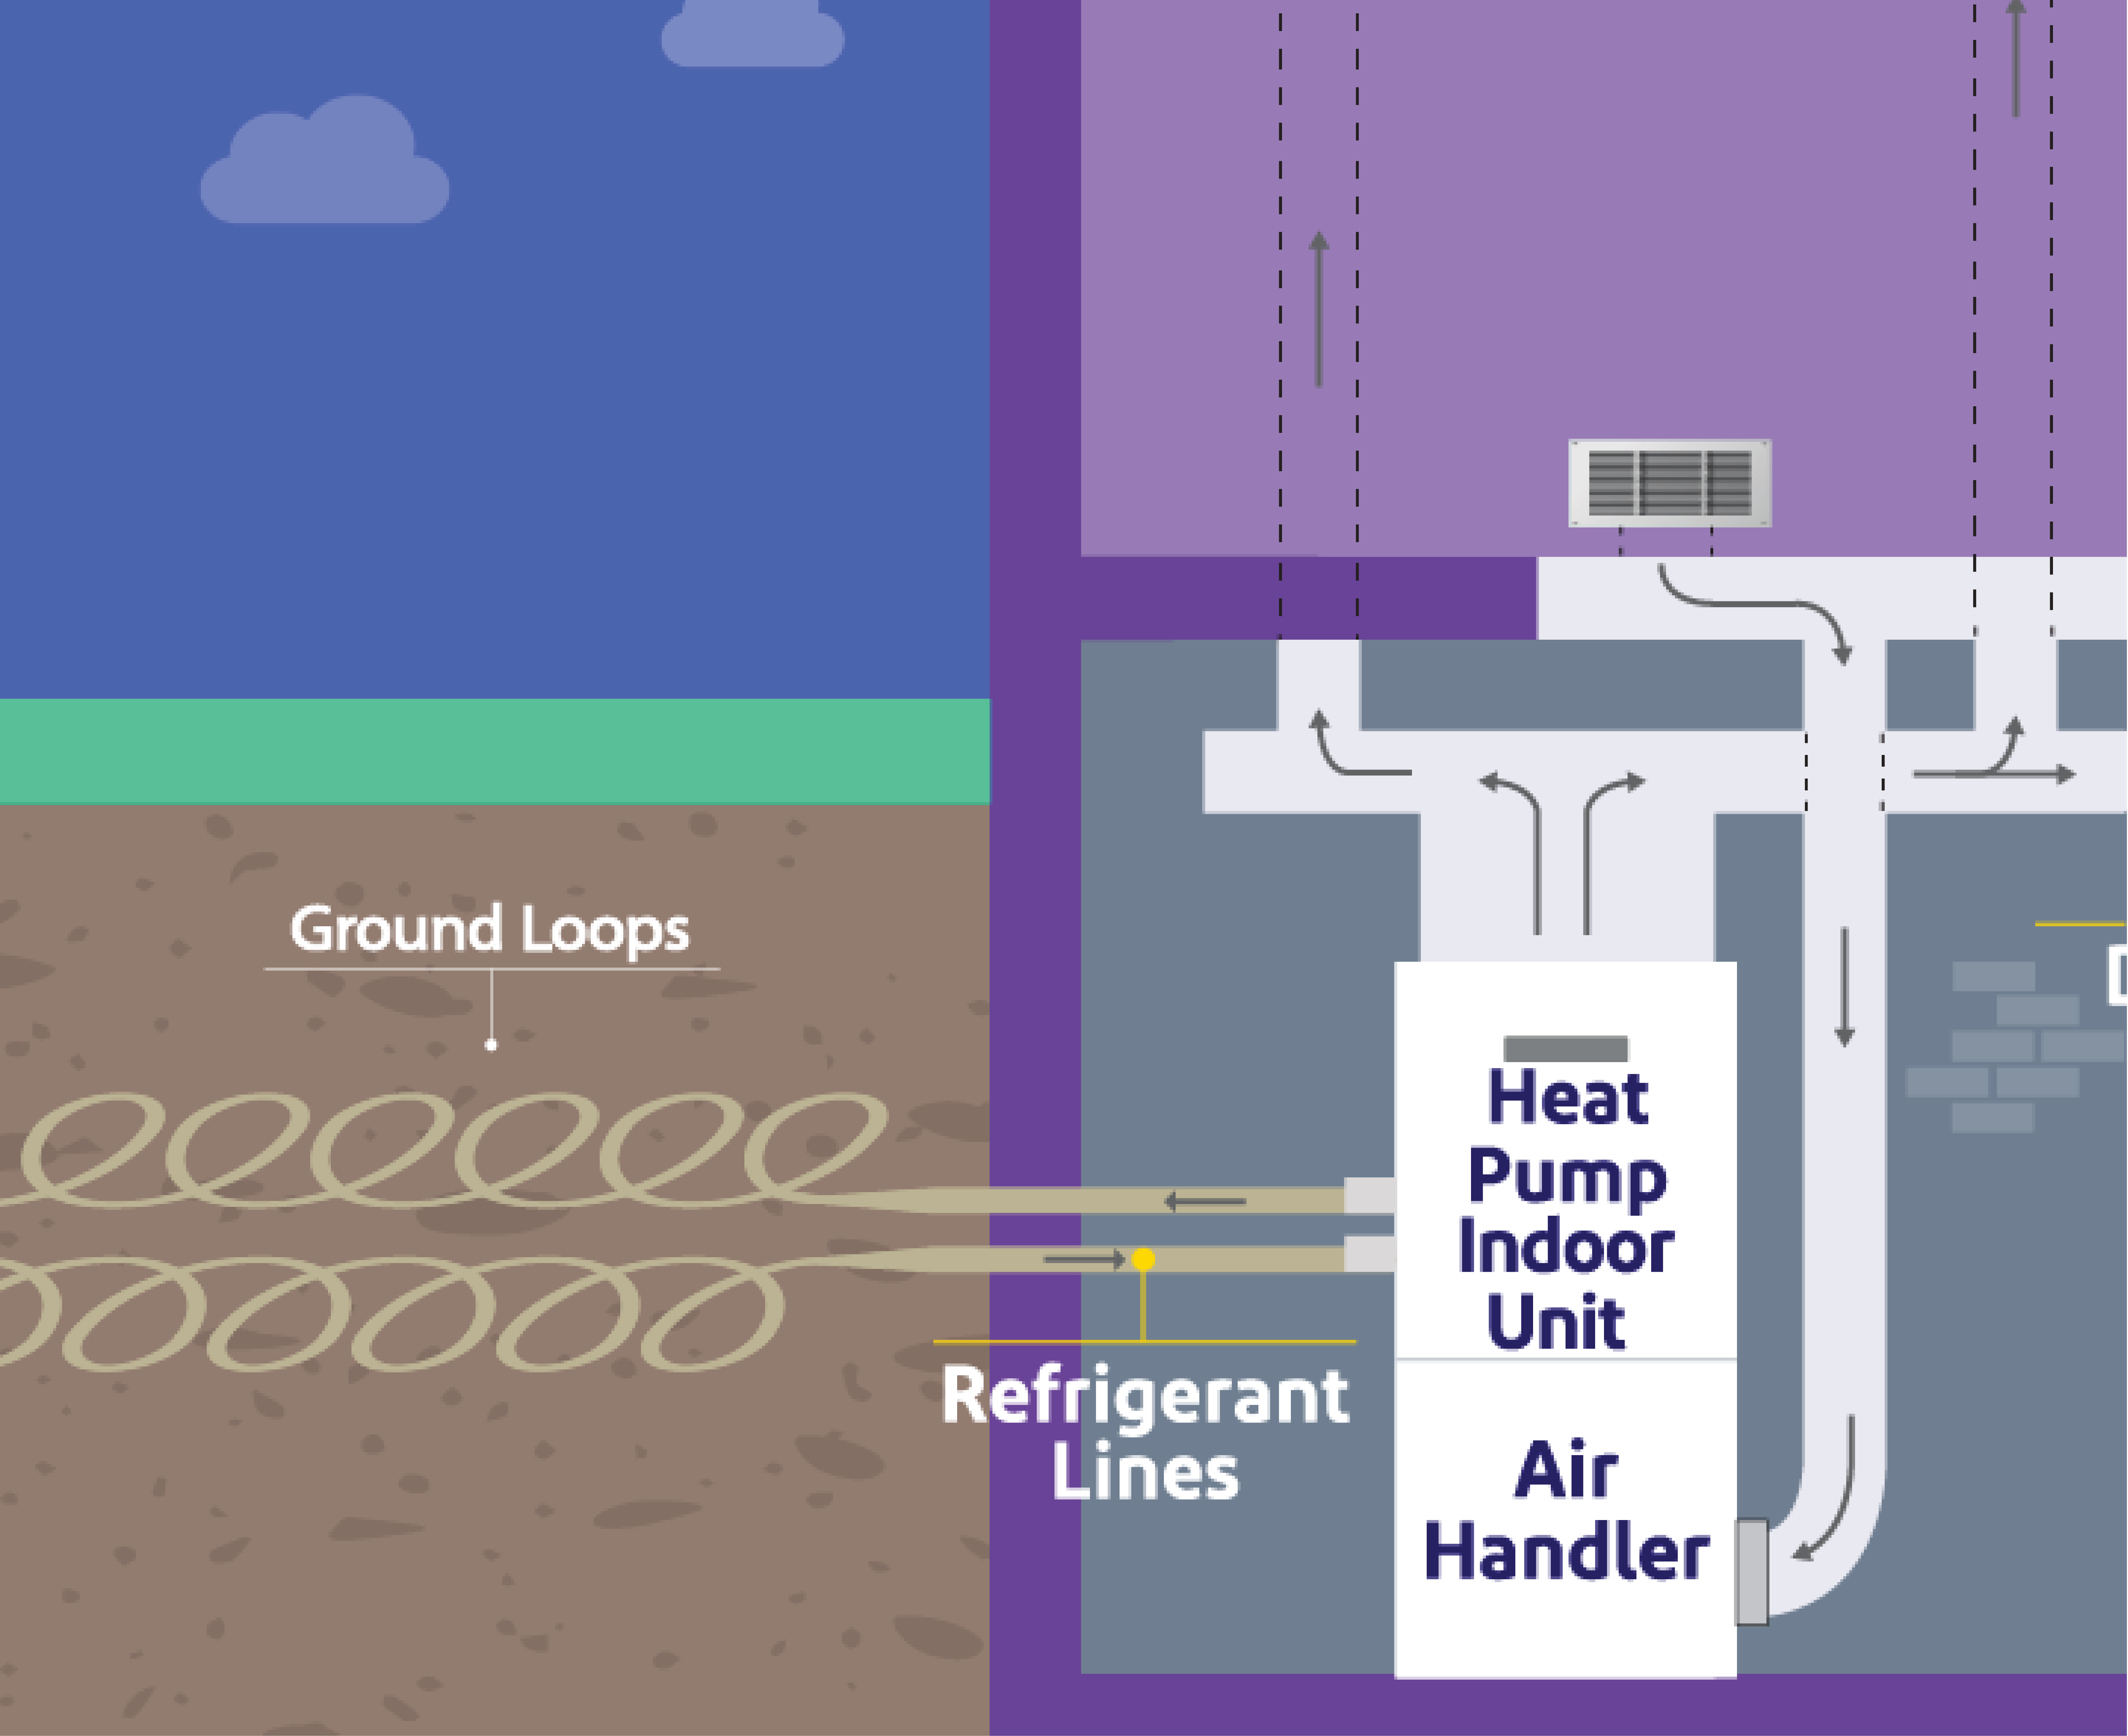 A graphic depicting how ground source (geothermal) heat pumps work.